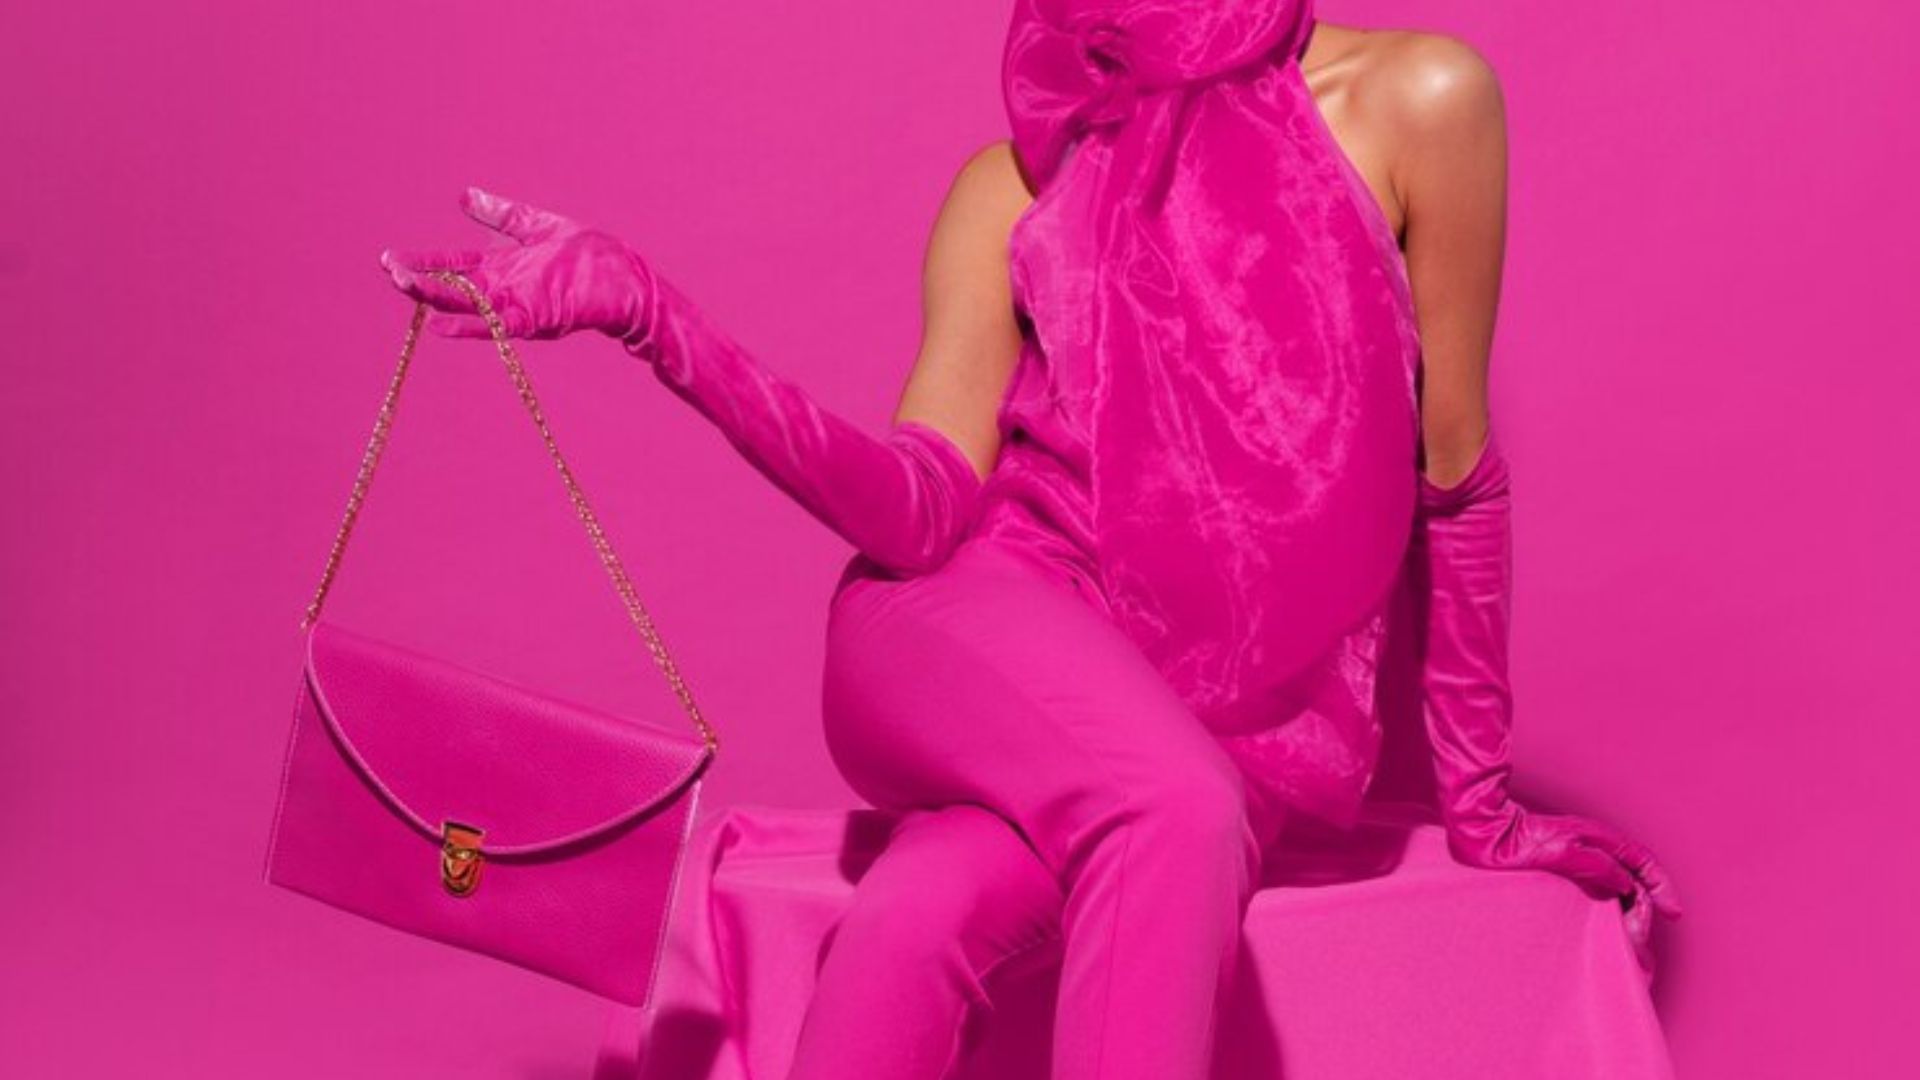 a lady wearing a pink outfit holding a pink bag